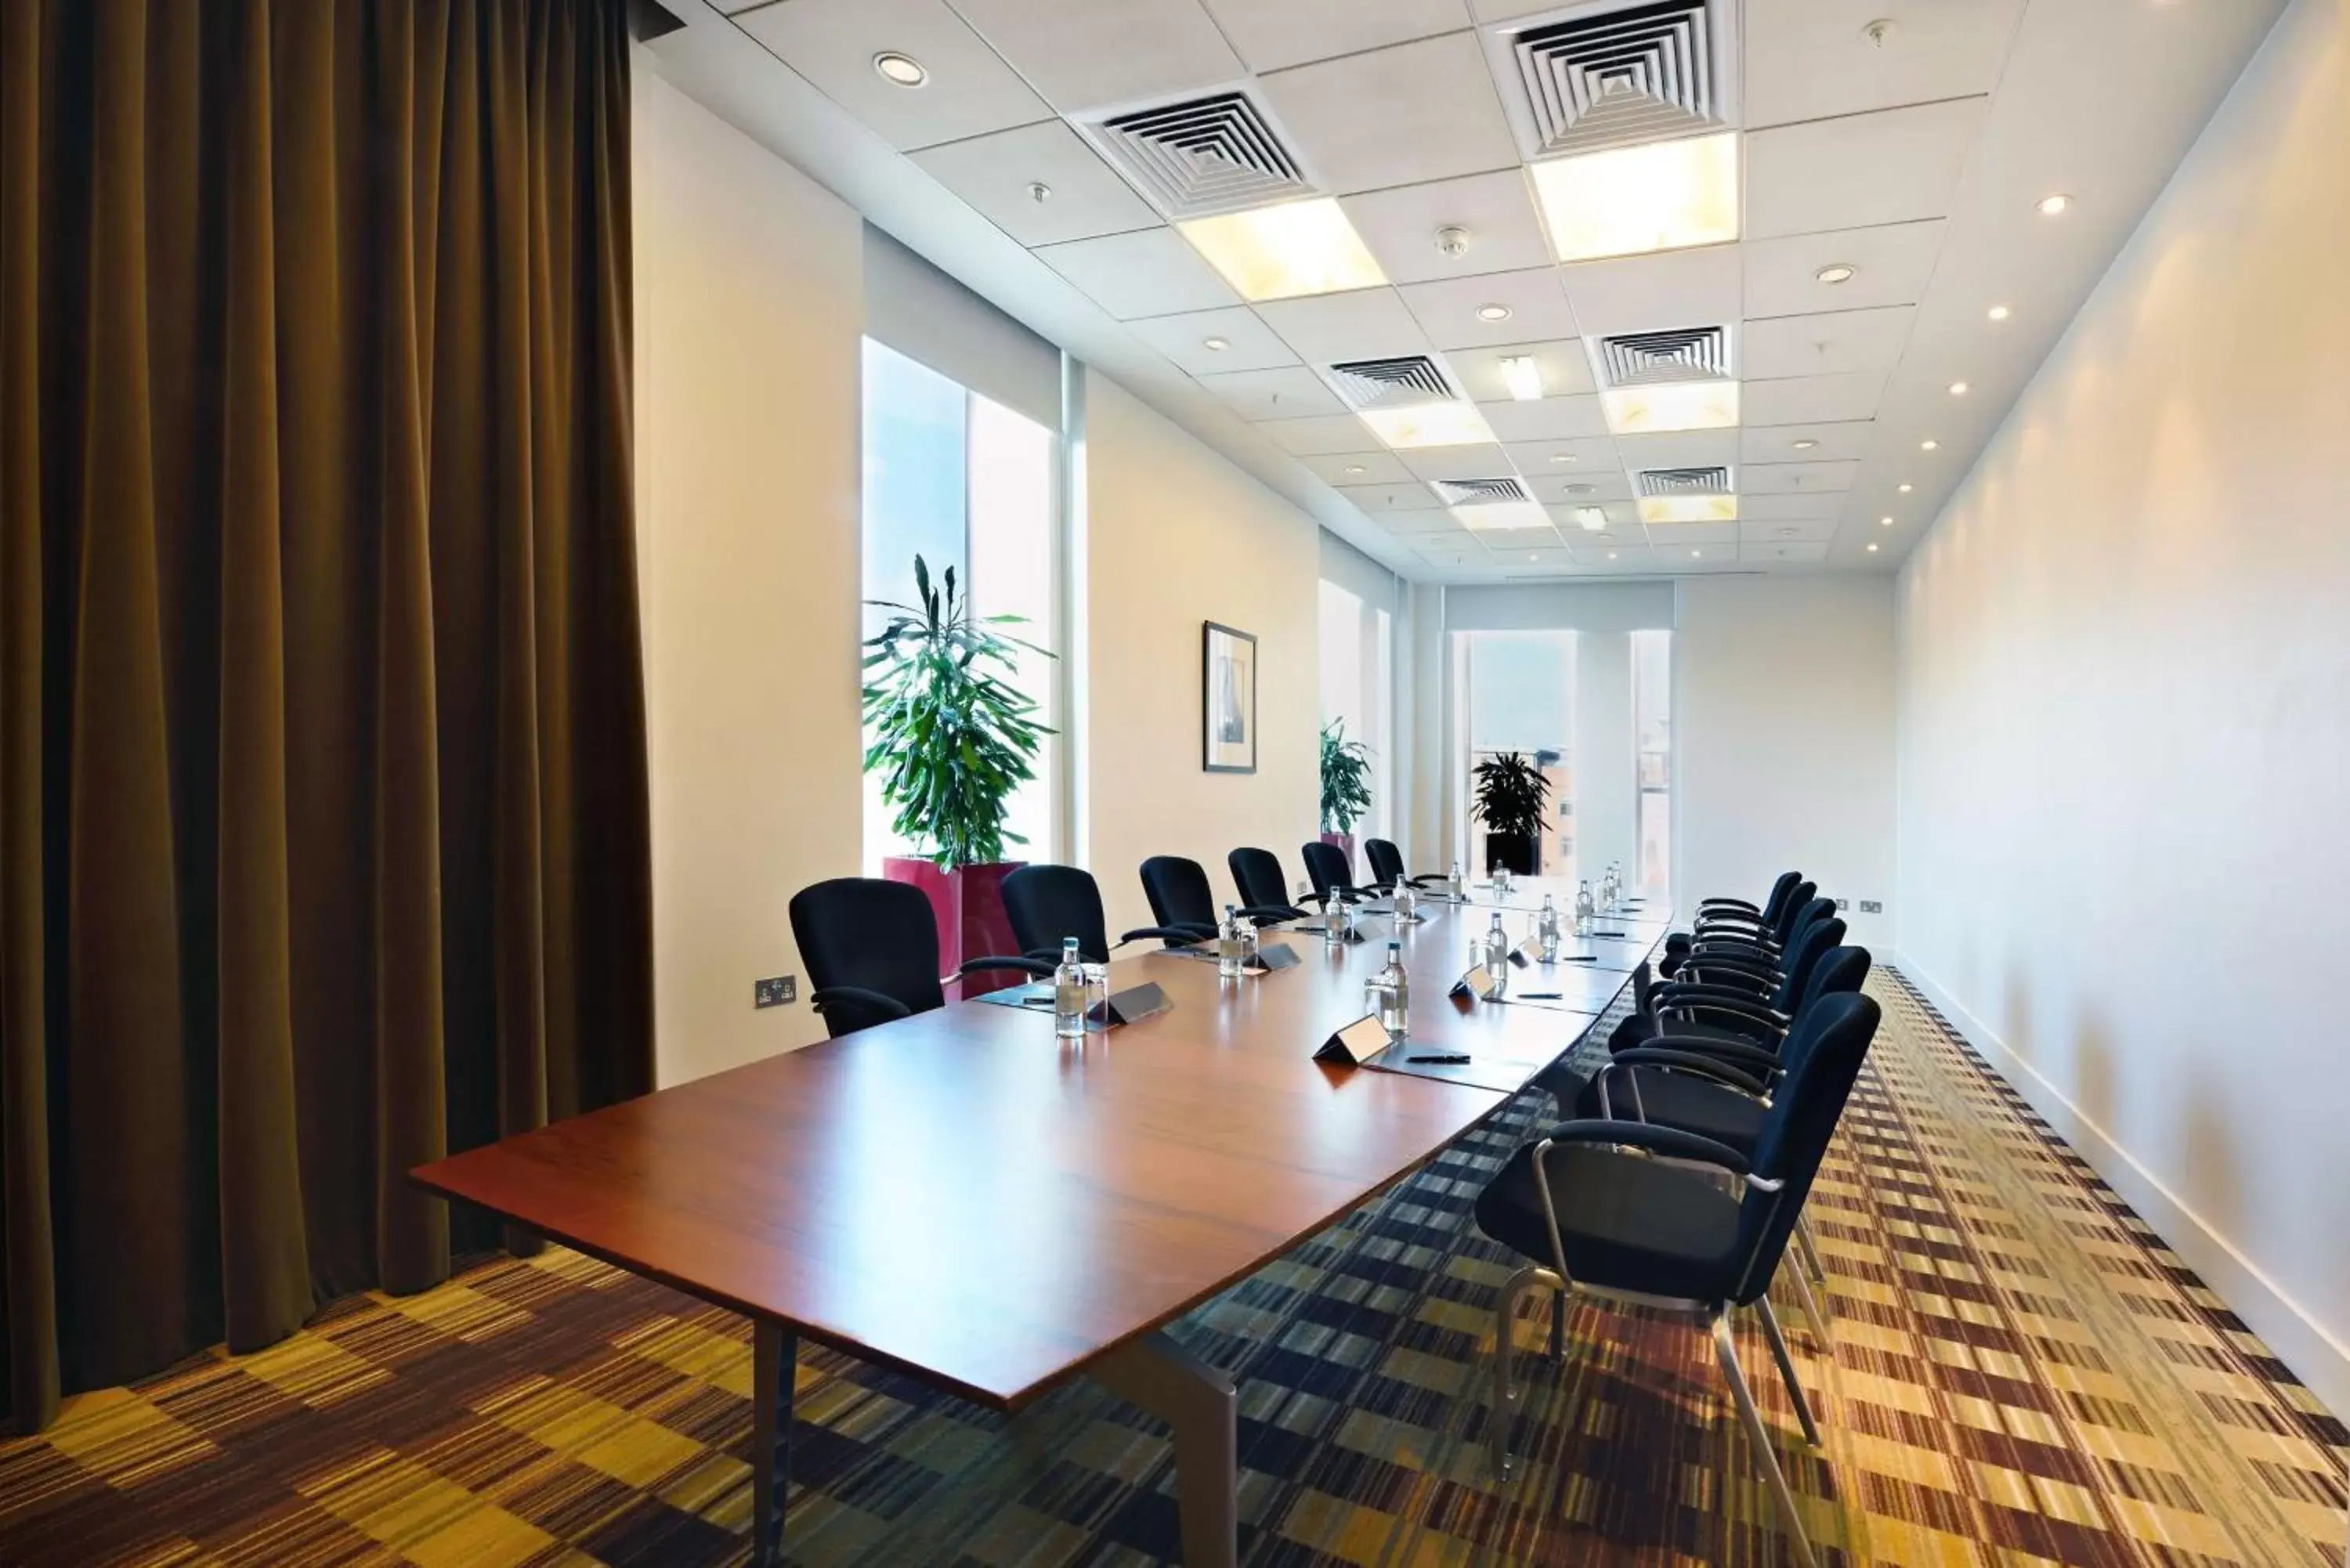 Meeting/conference room in Hilton Manchester Deansgate